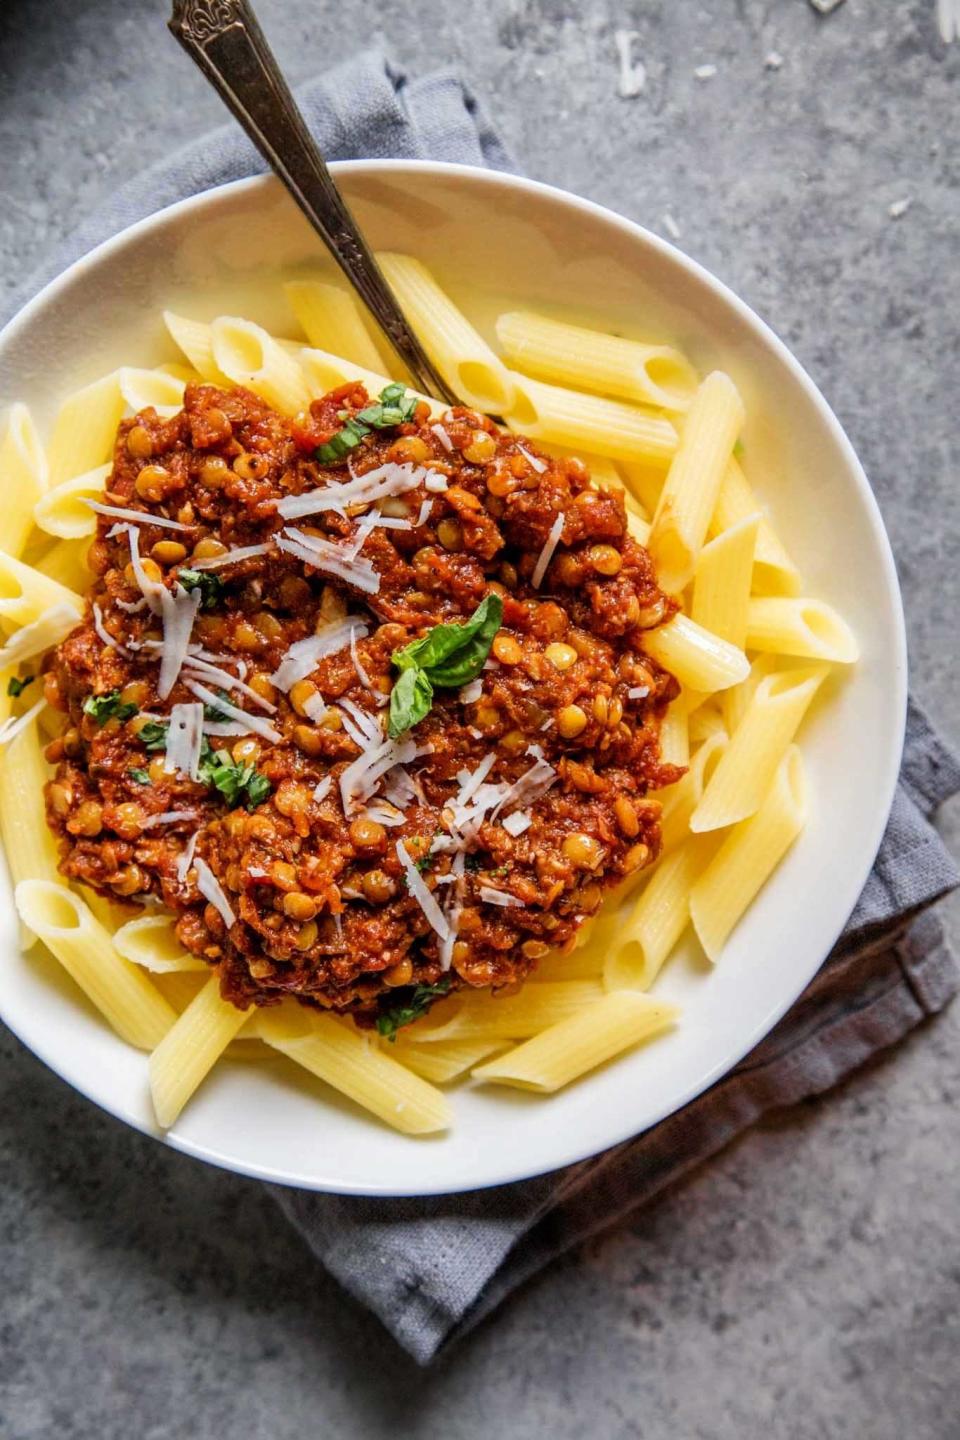 Penne topped with lentil Bolgonese.